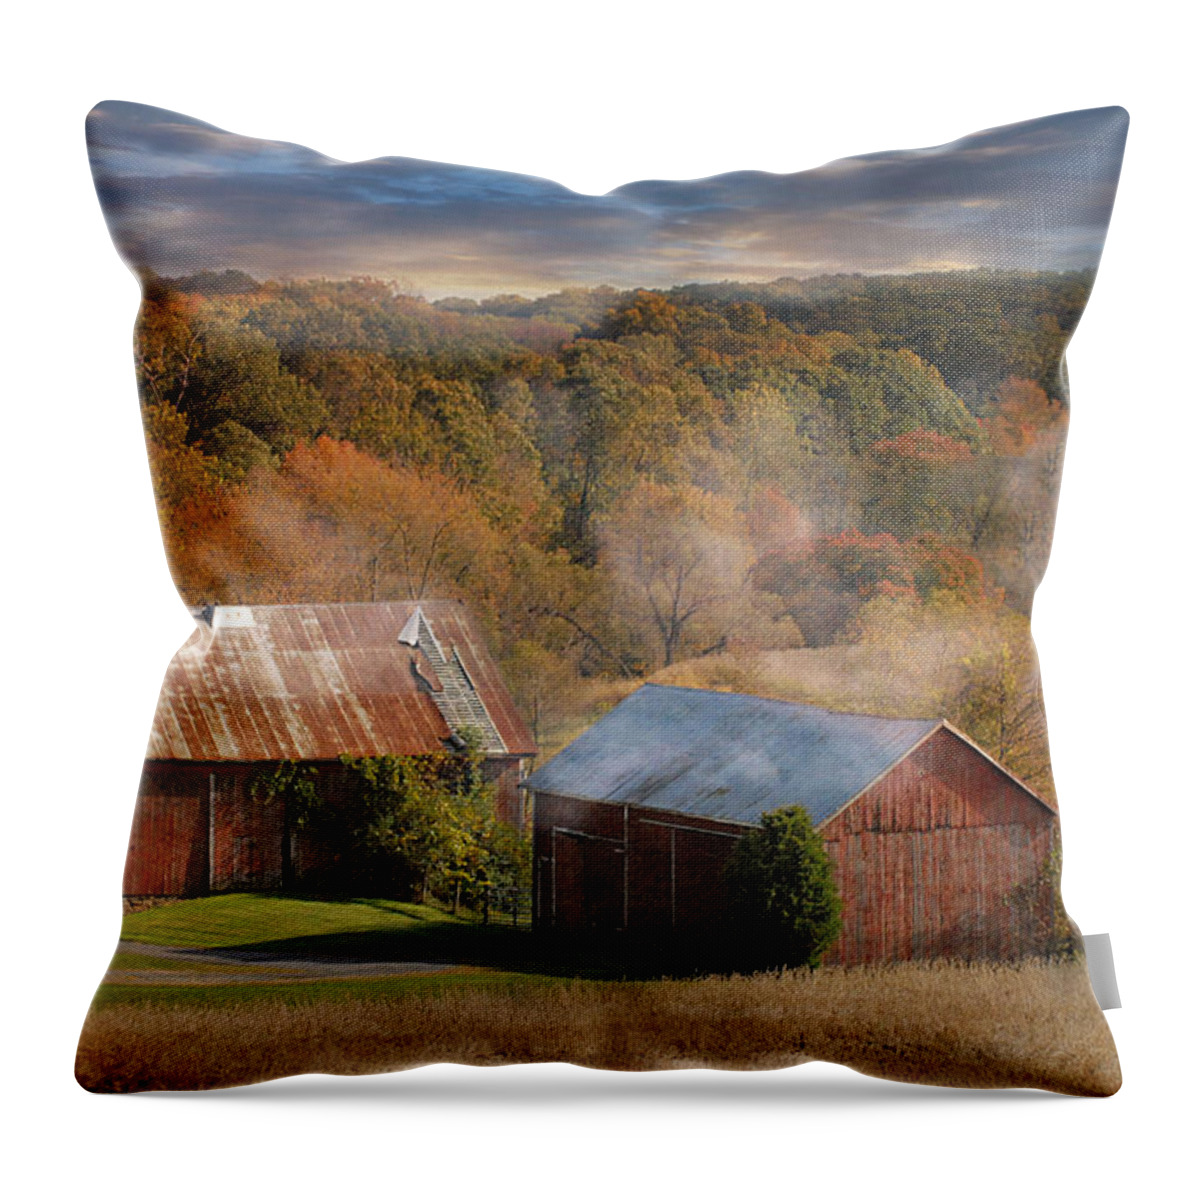 Farms Throw Pillow featuring the photograph Morning Burn by Fran J Scott